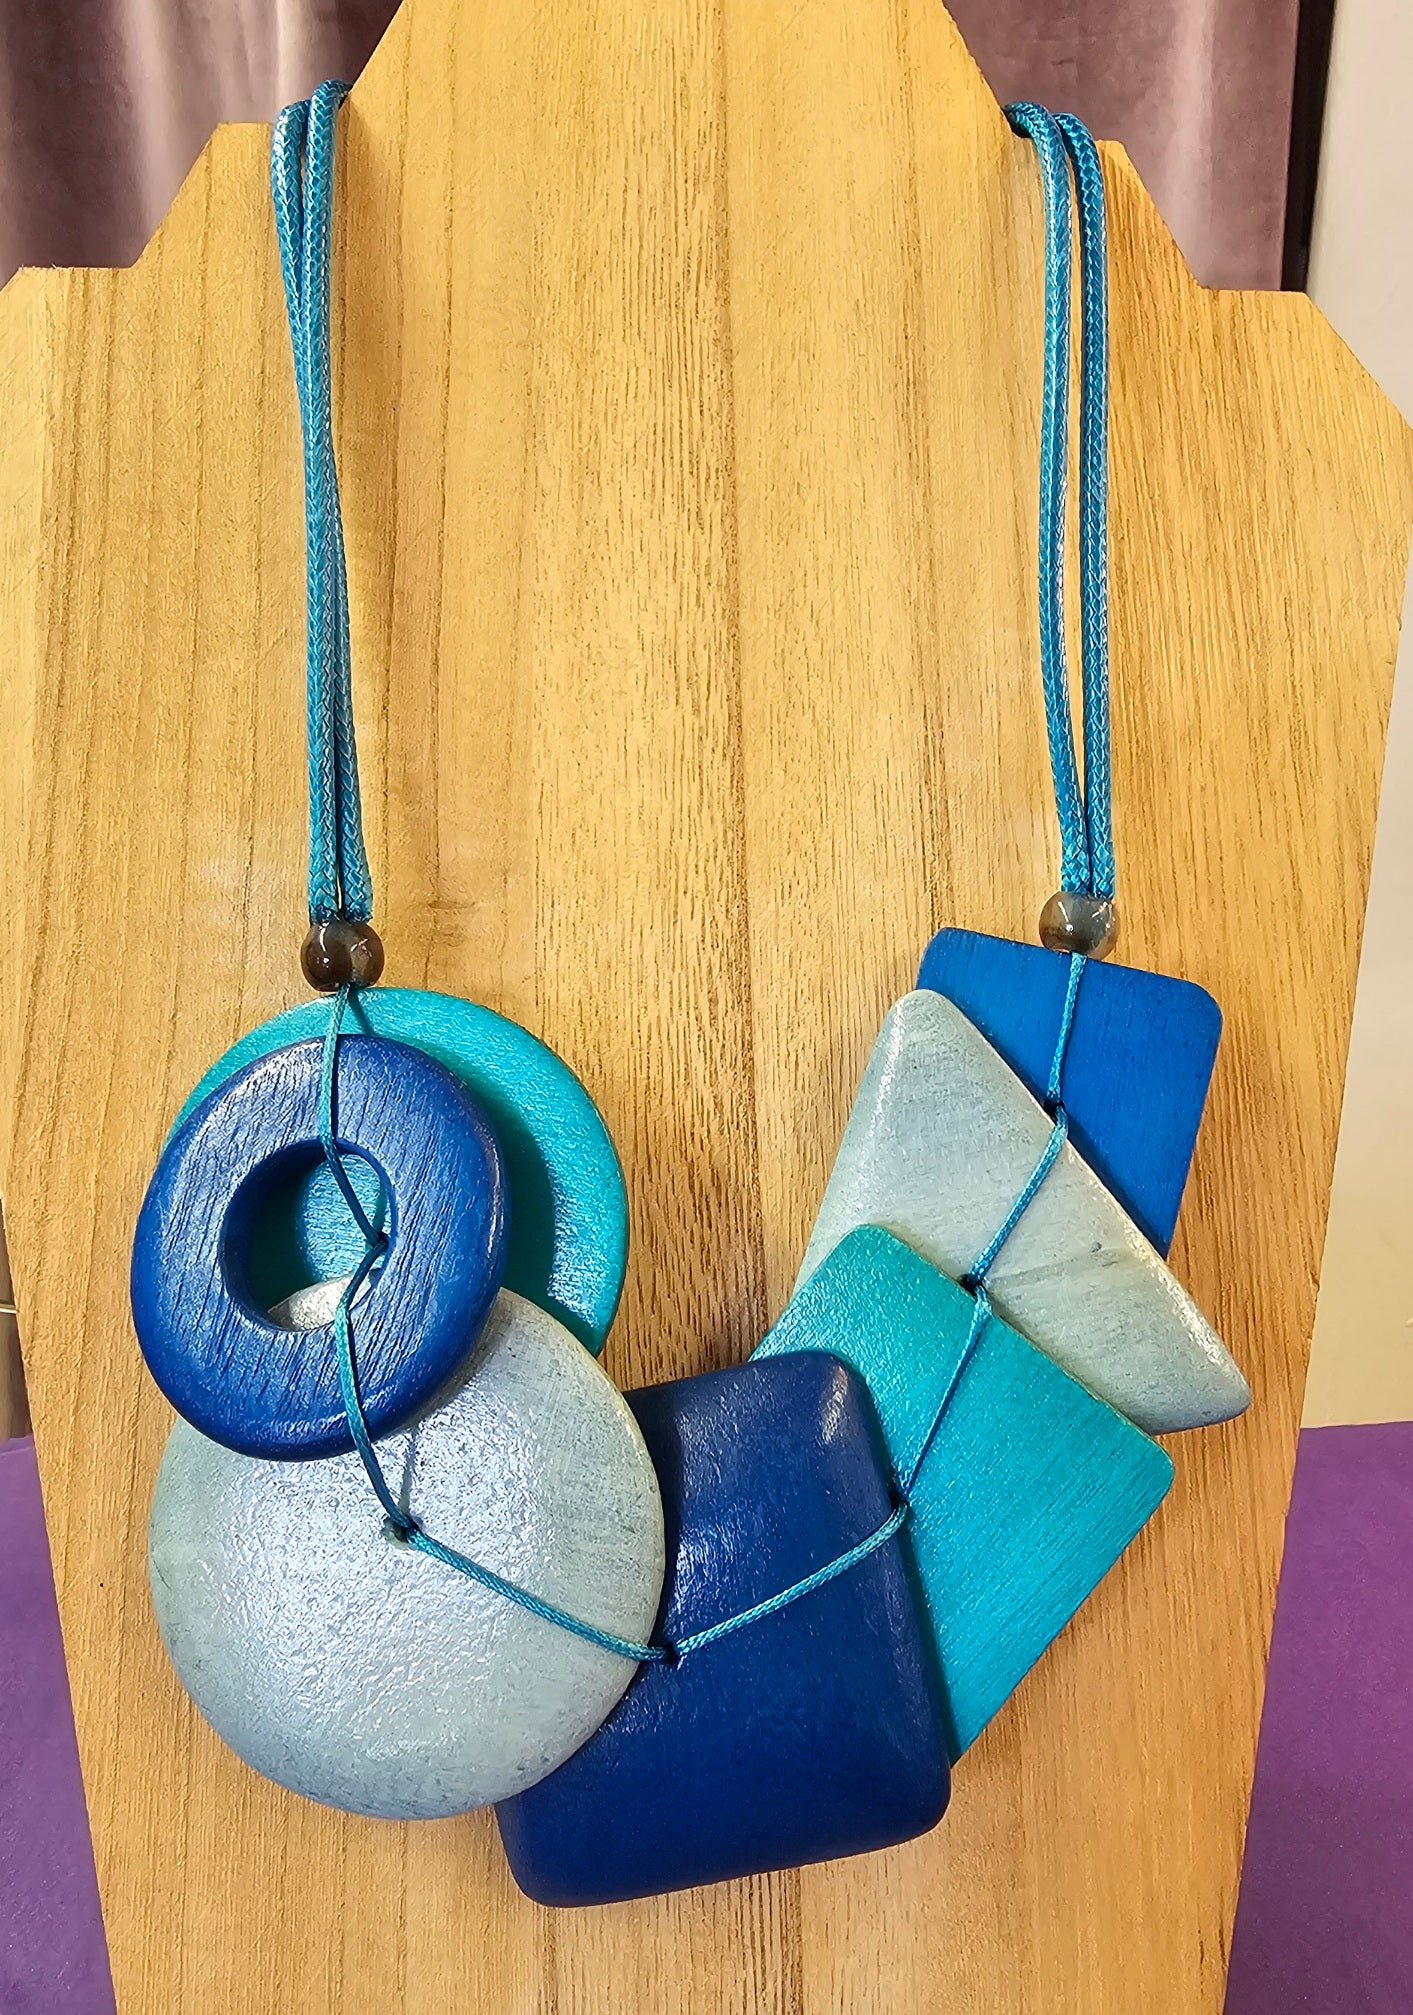 How to make an ombre polymer clay necklace - We Are Scout